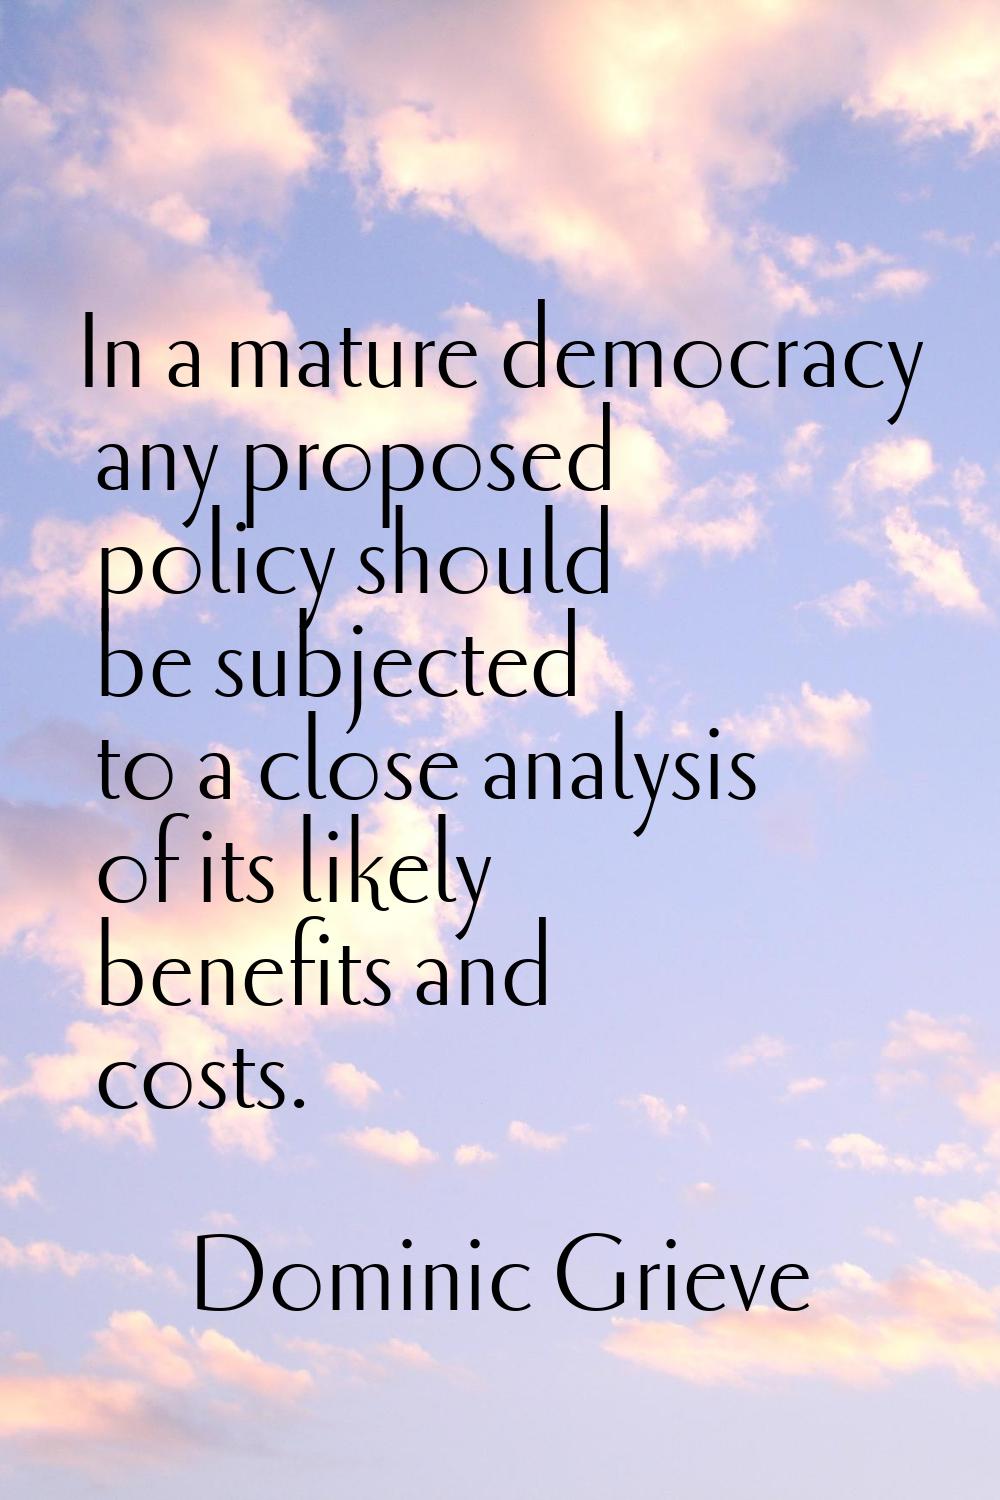 In a mature democracy any proposed policy should be subjected to a close analysis of its likely ben